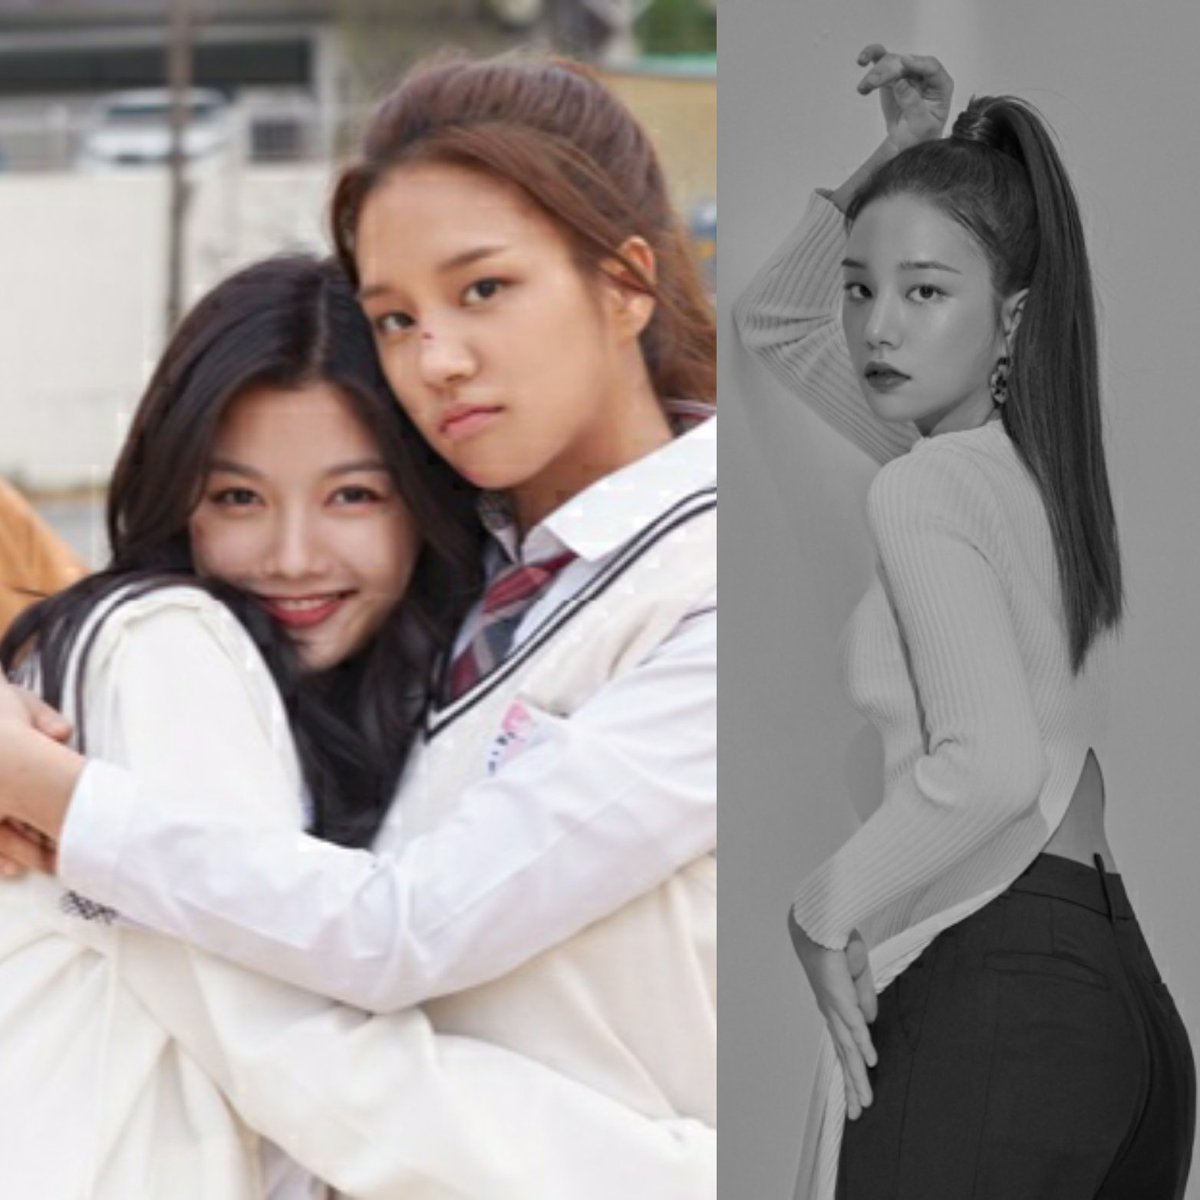 #Solbin. on her girl group interview:"She's actually two years yo...